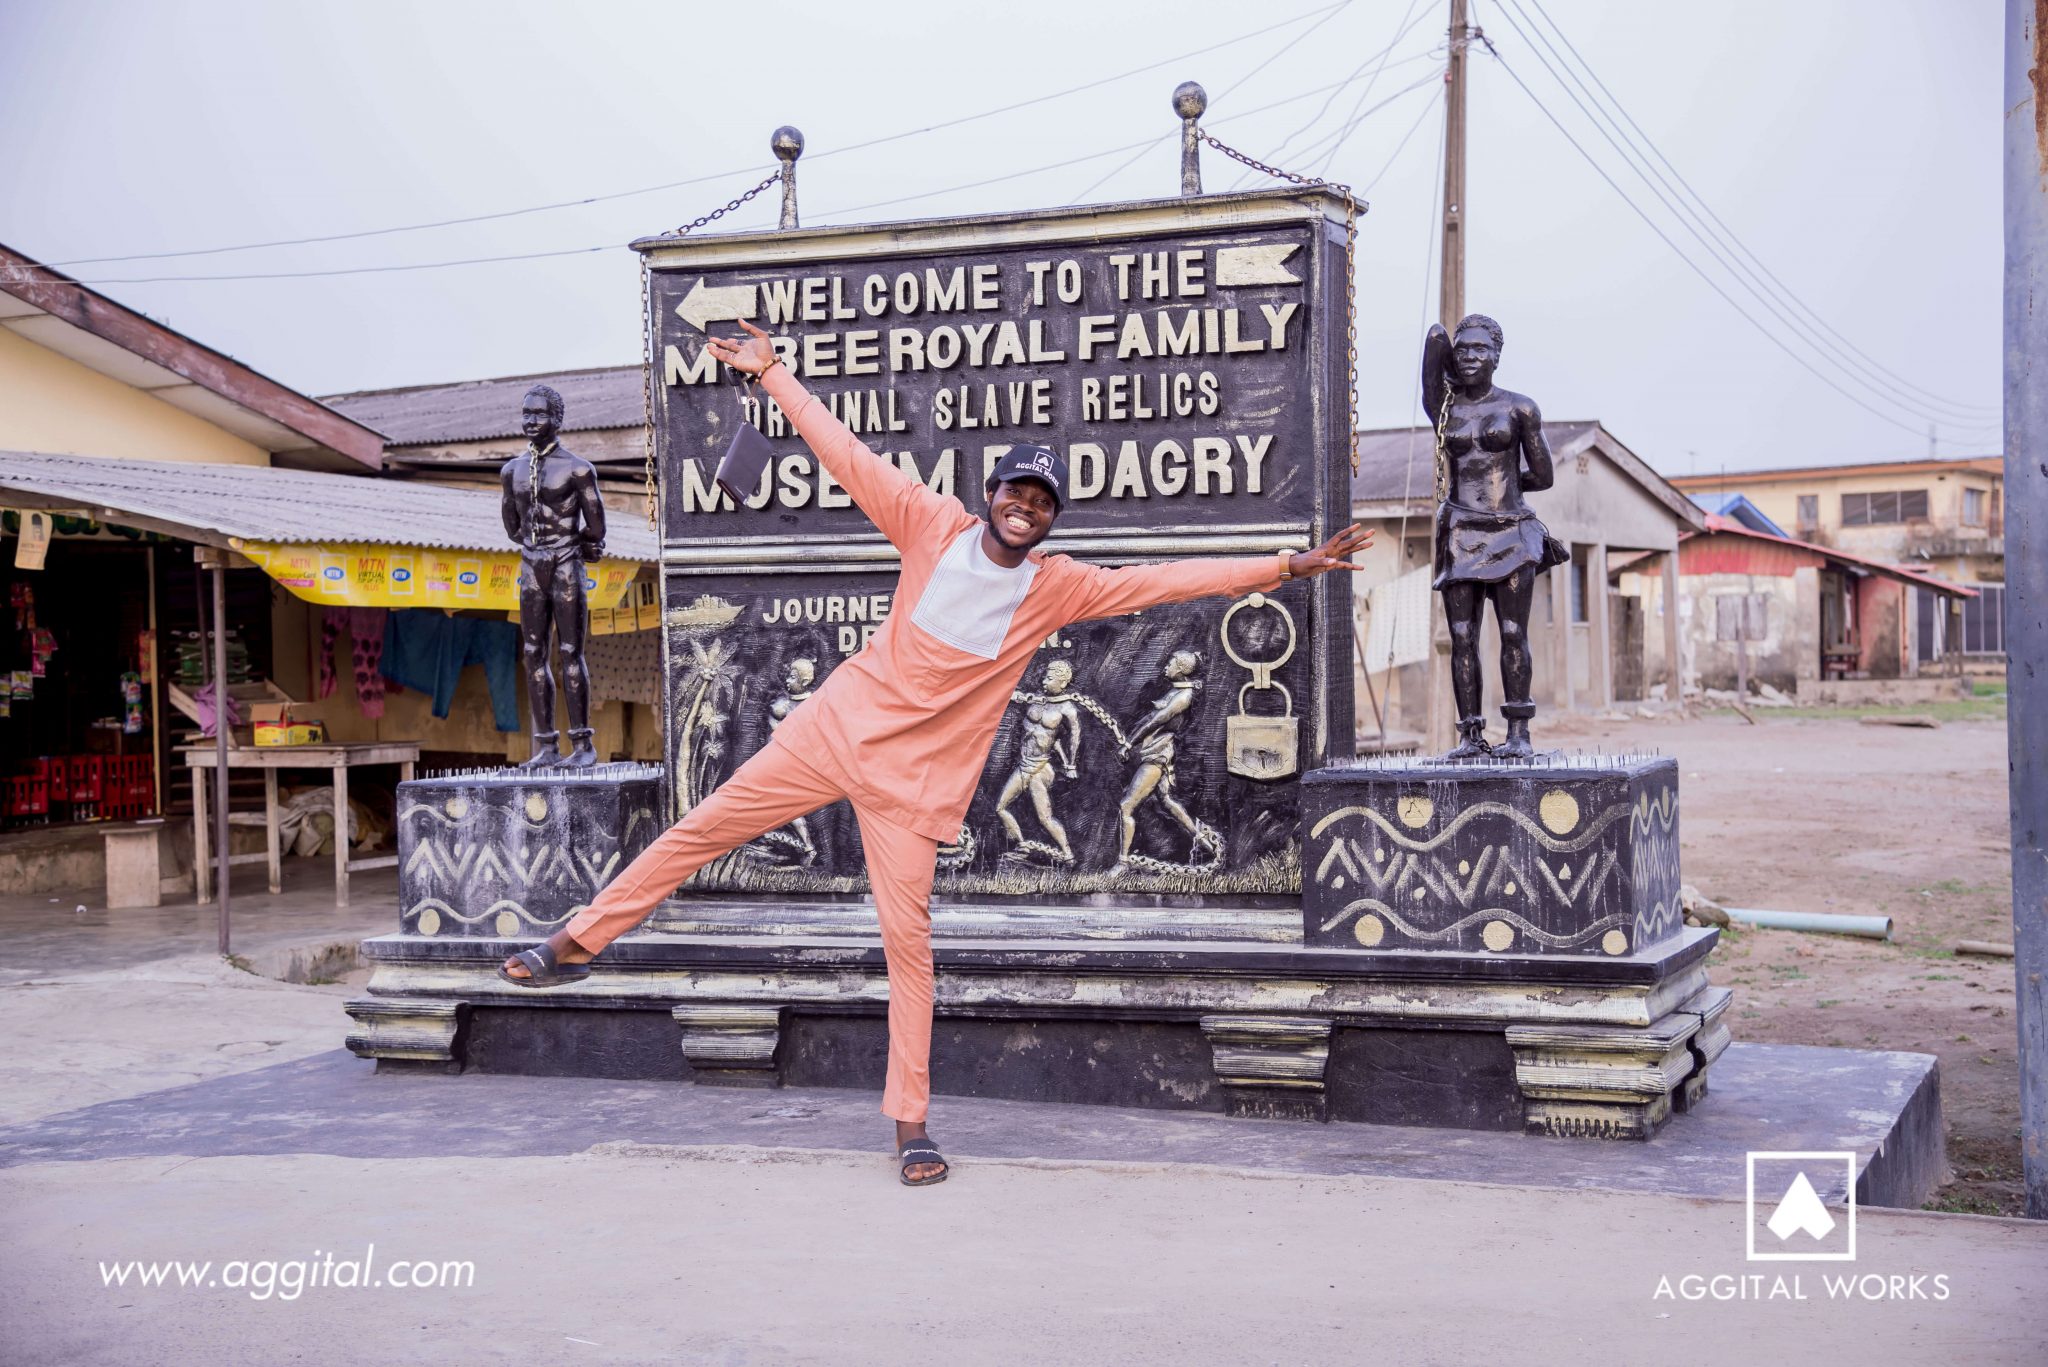 Aggital Travel Diary - Our Very First Road Trip To Badagry.